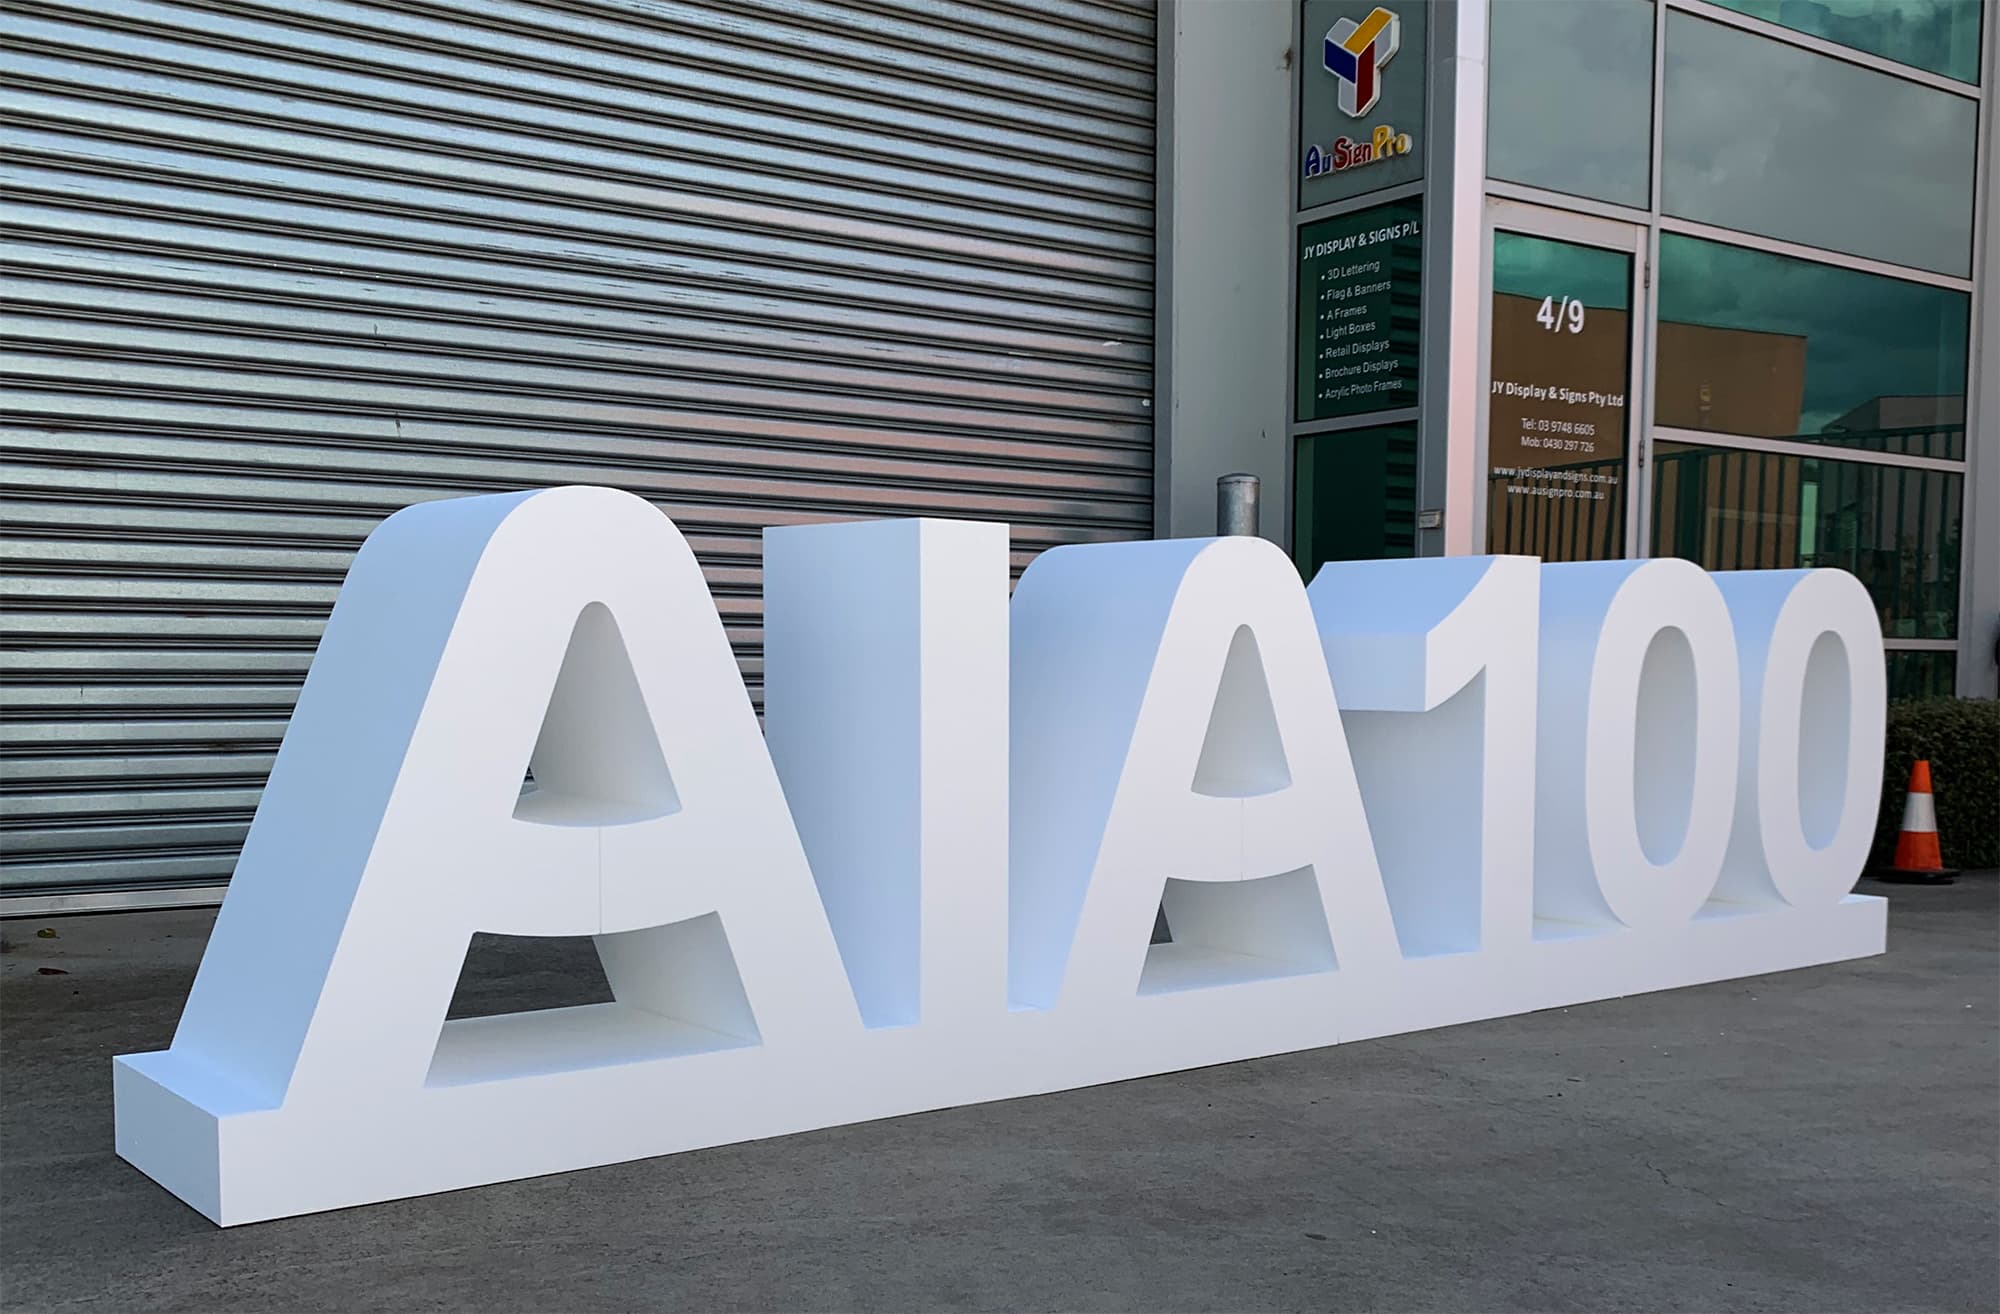 Giant 3d foam letter for AIA 100 